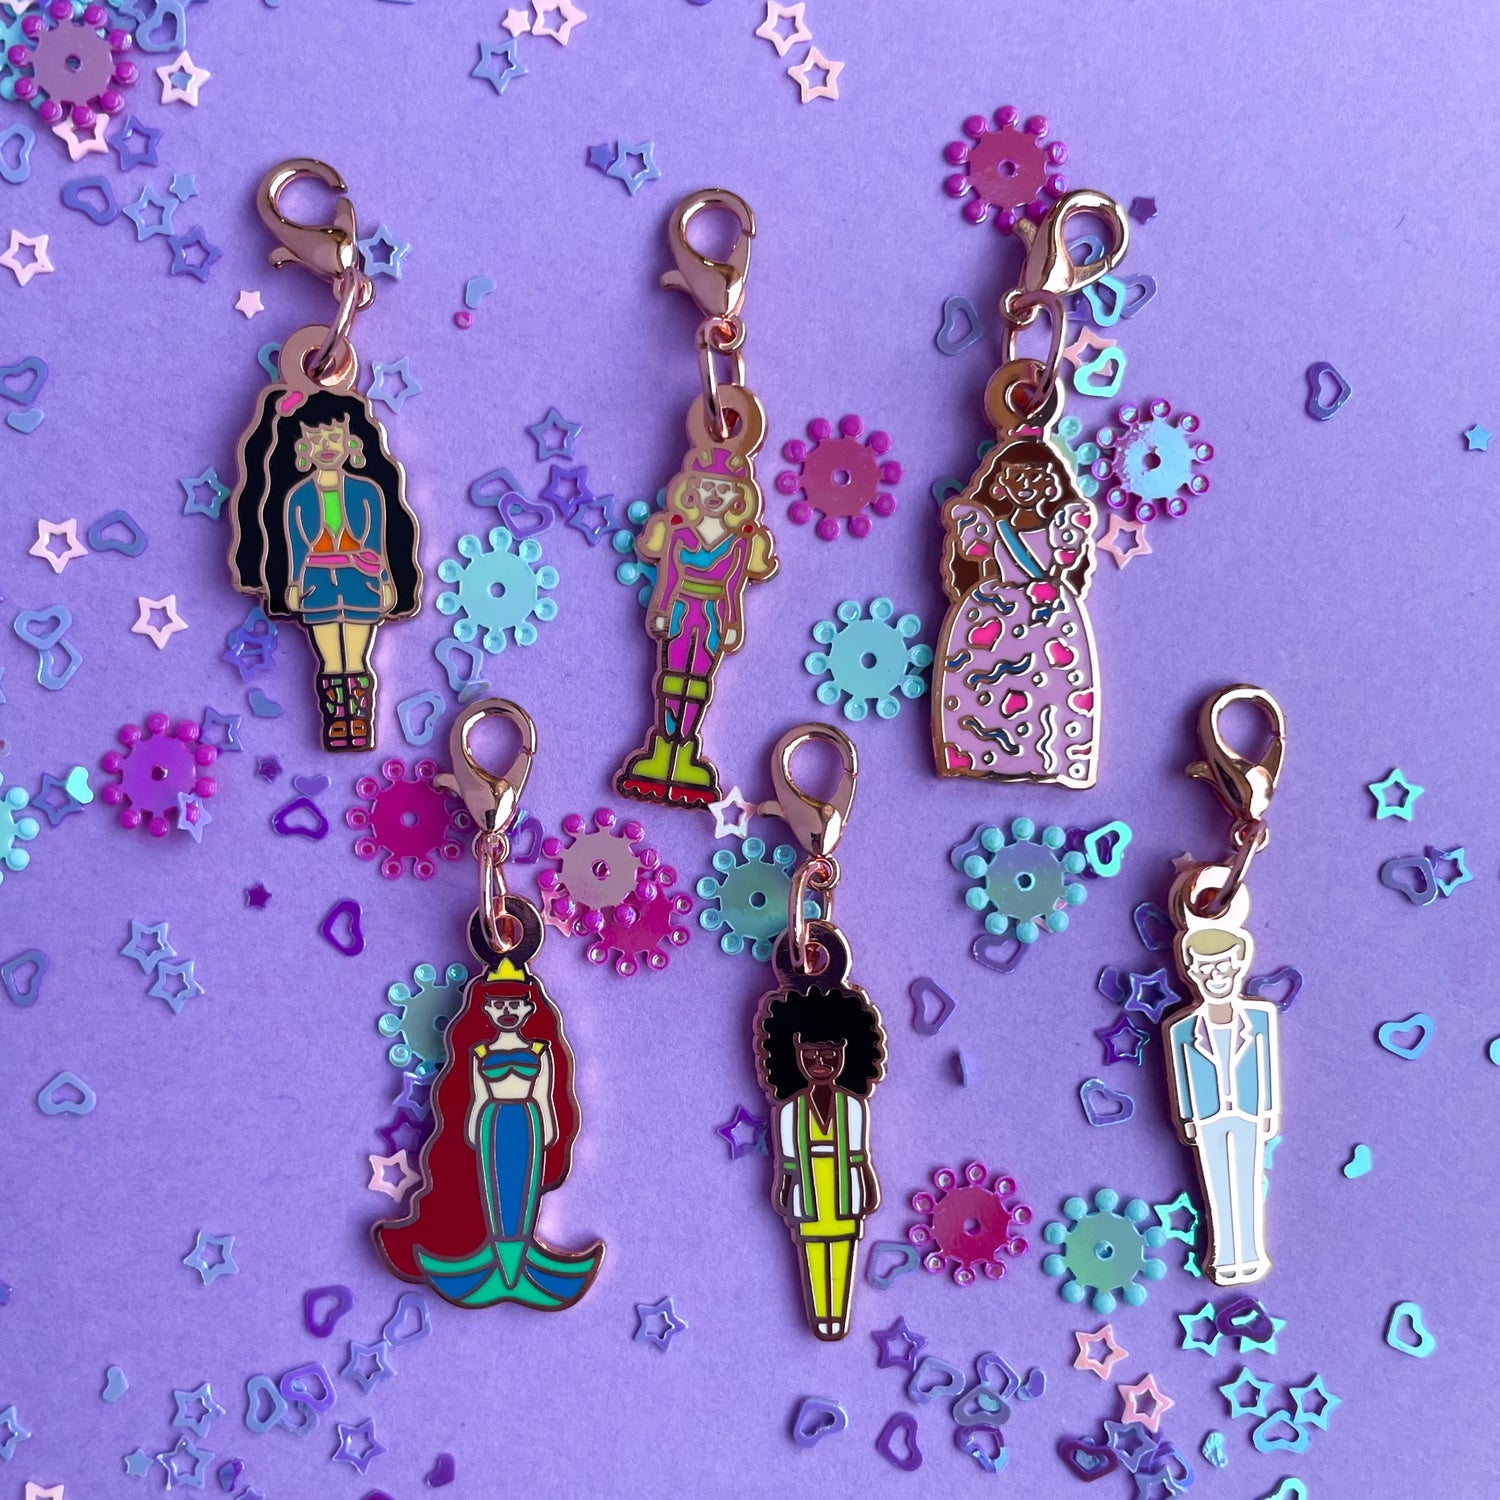 Six doll shaped charms on a lavender paper background covered in confetti